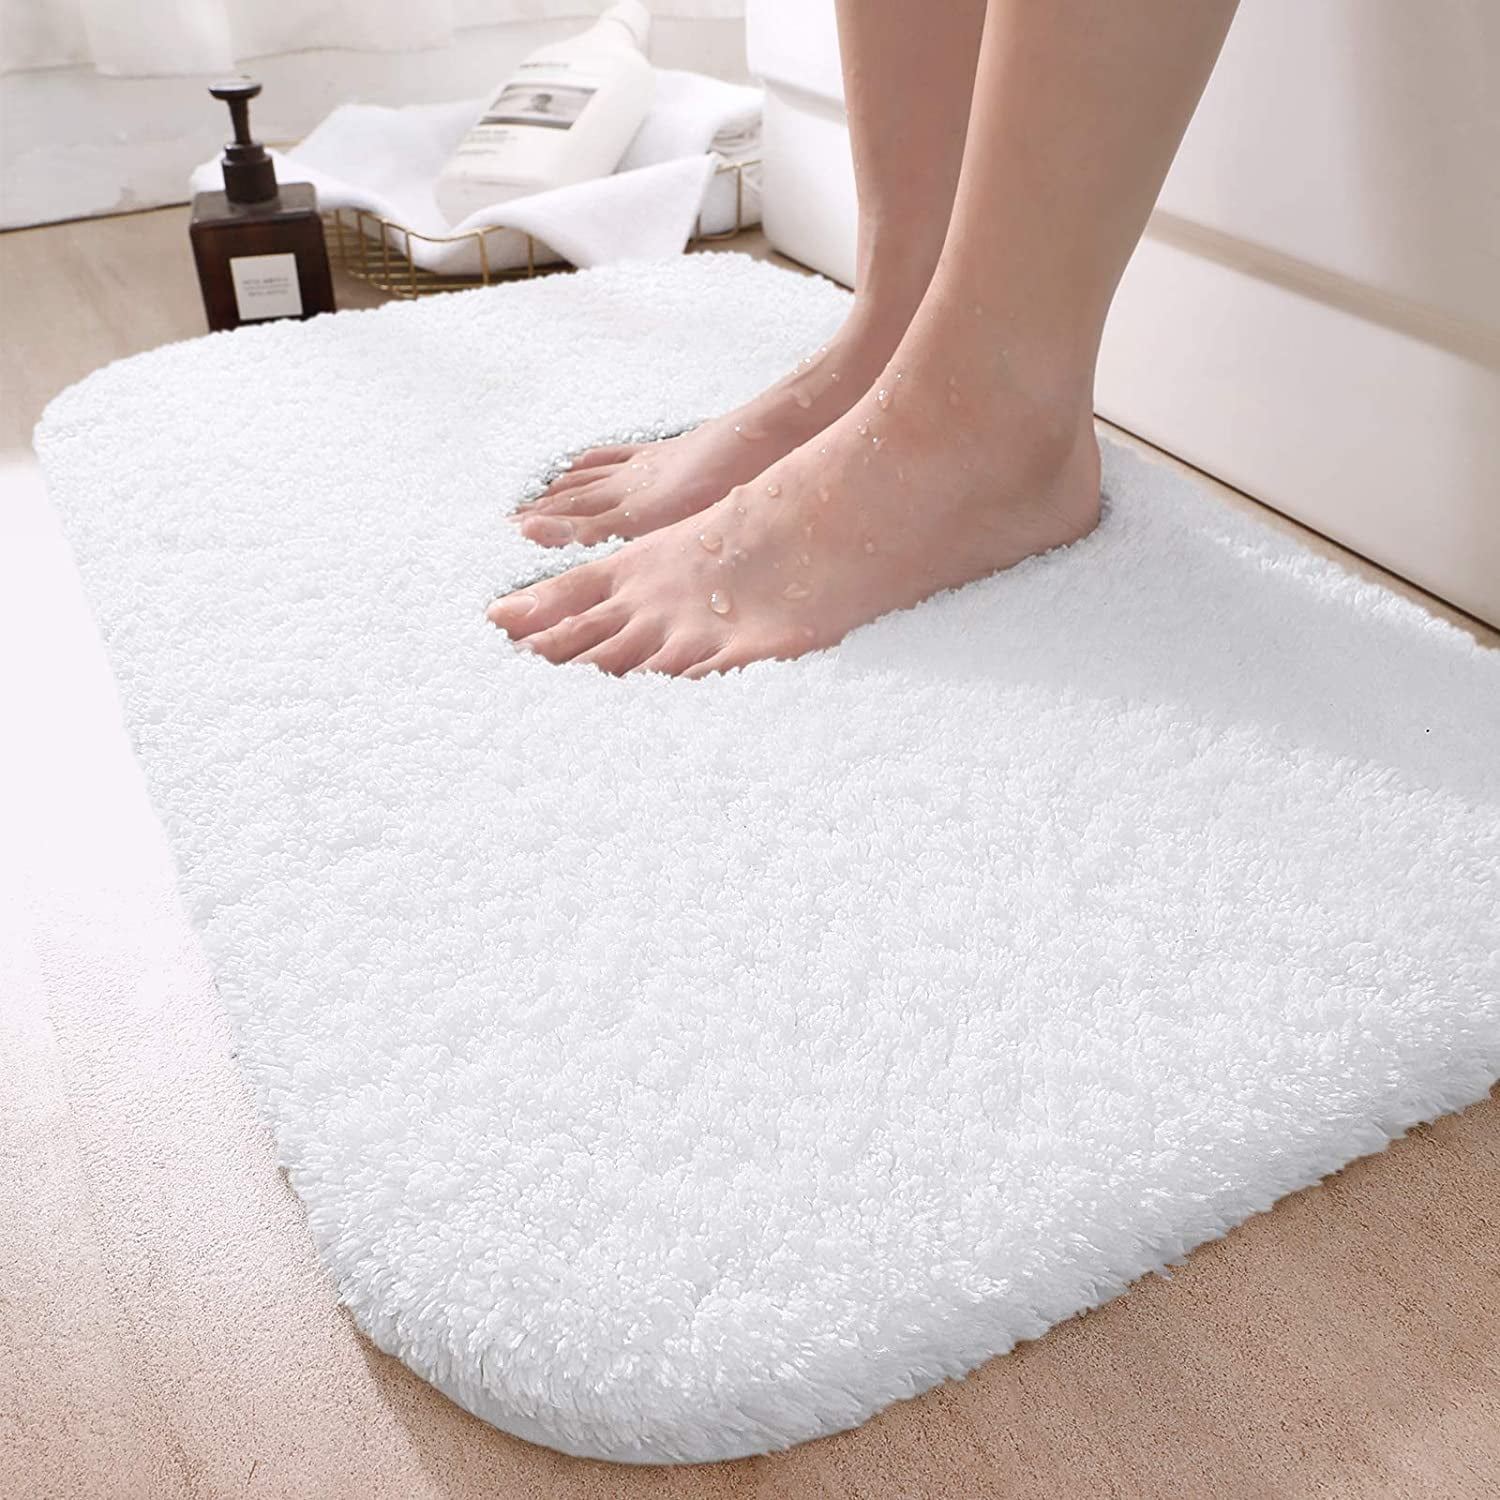 Disolla Bathroom Rugs Washable Bath Mat 20x32 inches Non Slip Soft Floor  Mat for Bathroom Water Absorbent Thin Shaggy Bath Rug for After Showering